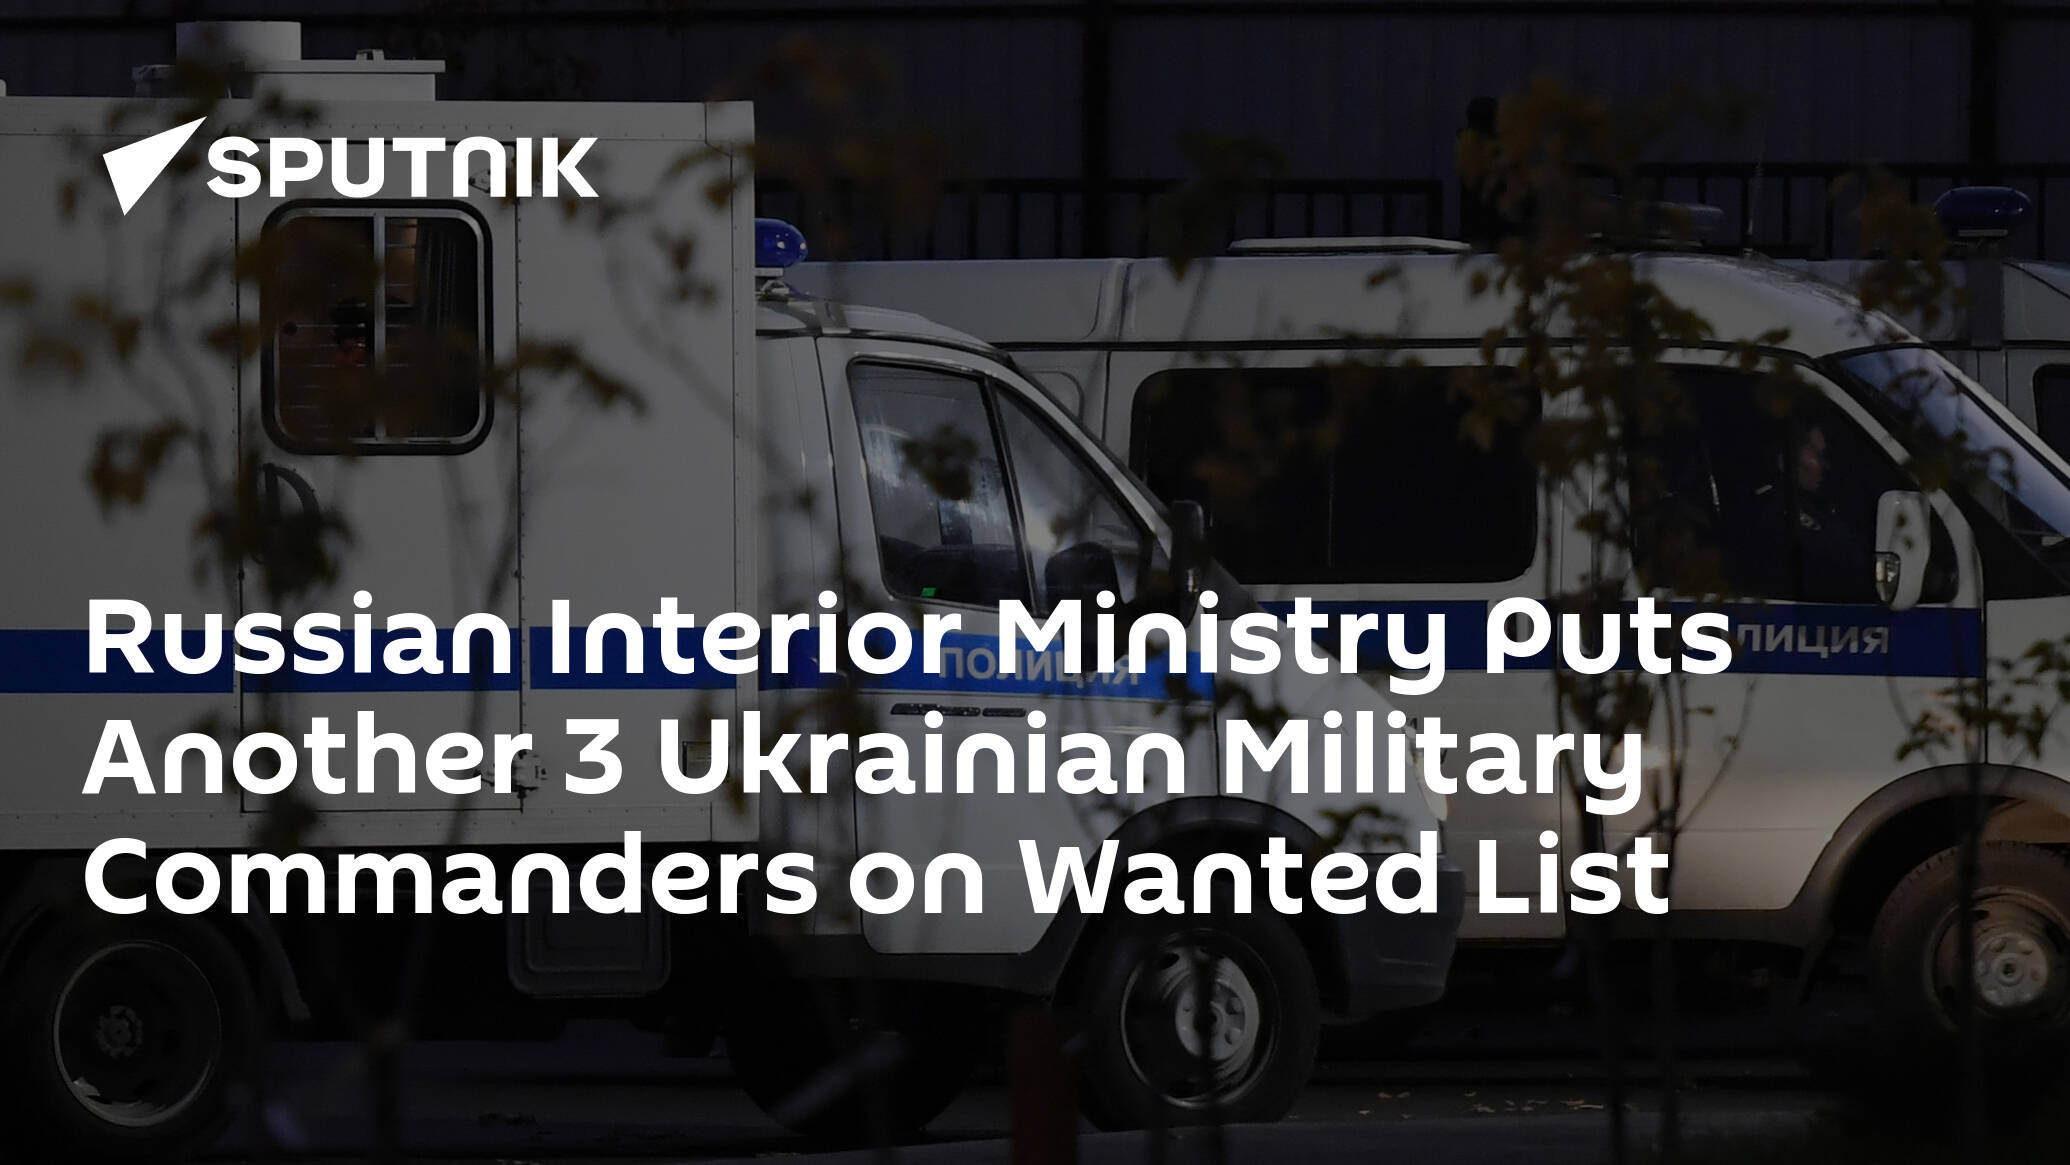 Russian Interior Ministry Puts Another 3 Ukrainian Military Commanders on Wanted List